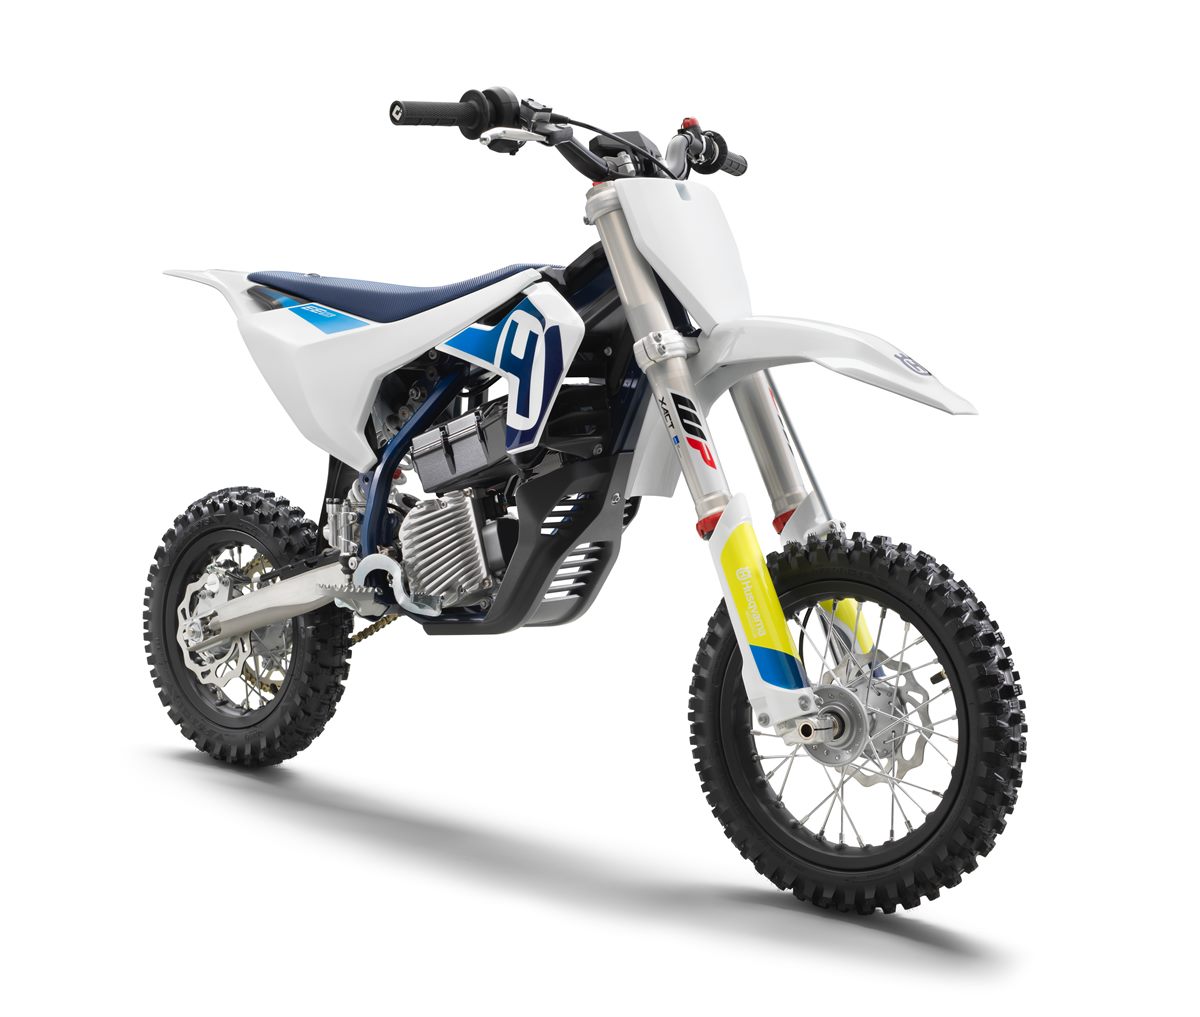 HUSQVARNA MOTORCYCLES LAUNCH FIRST EVER ELECTRIC MOTORCYCLE, THE ALL-NEW EE 5